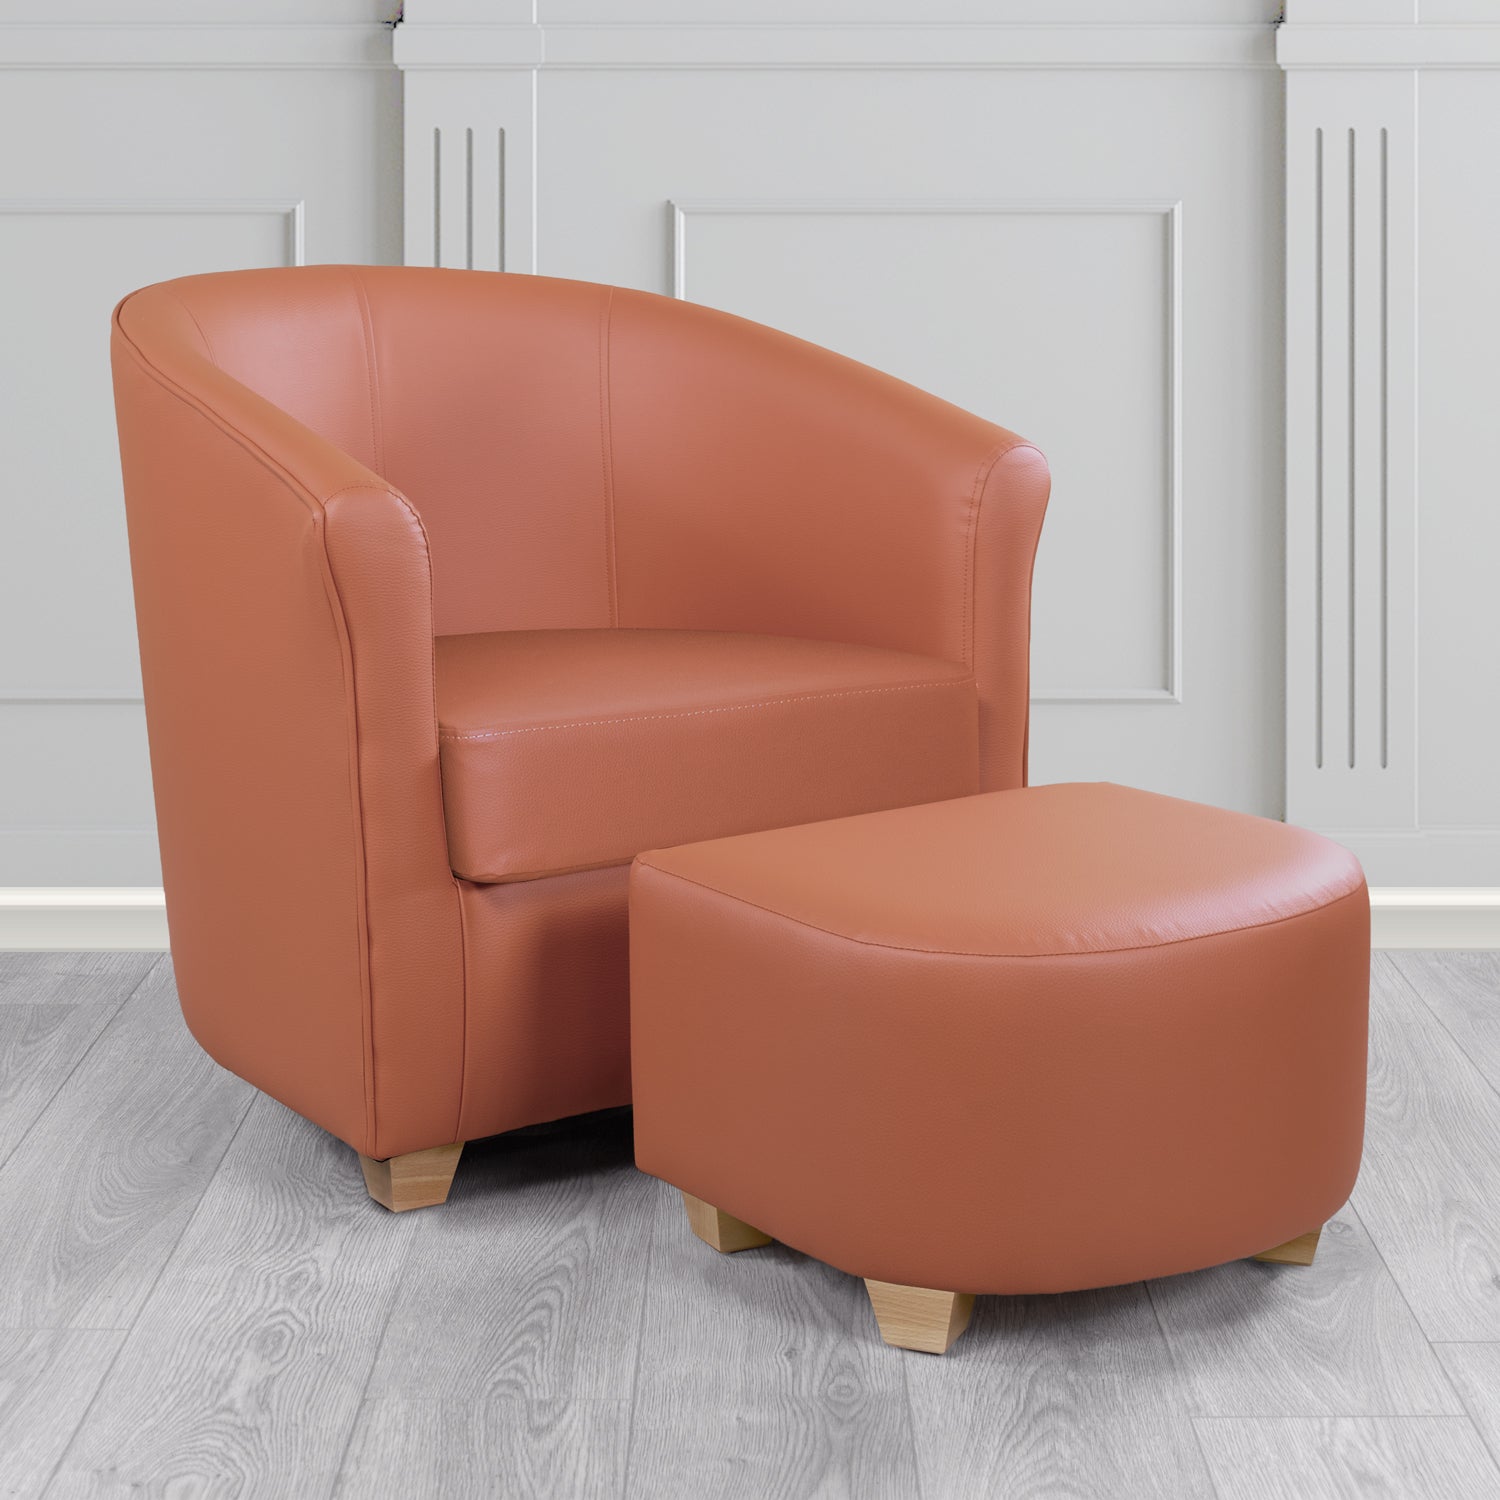 Cannes Tub Chair with Footstool Set in Just Colour Rusty Crib 5 Faux Leather - The Tub Chair Shop